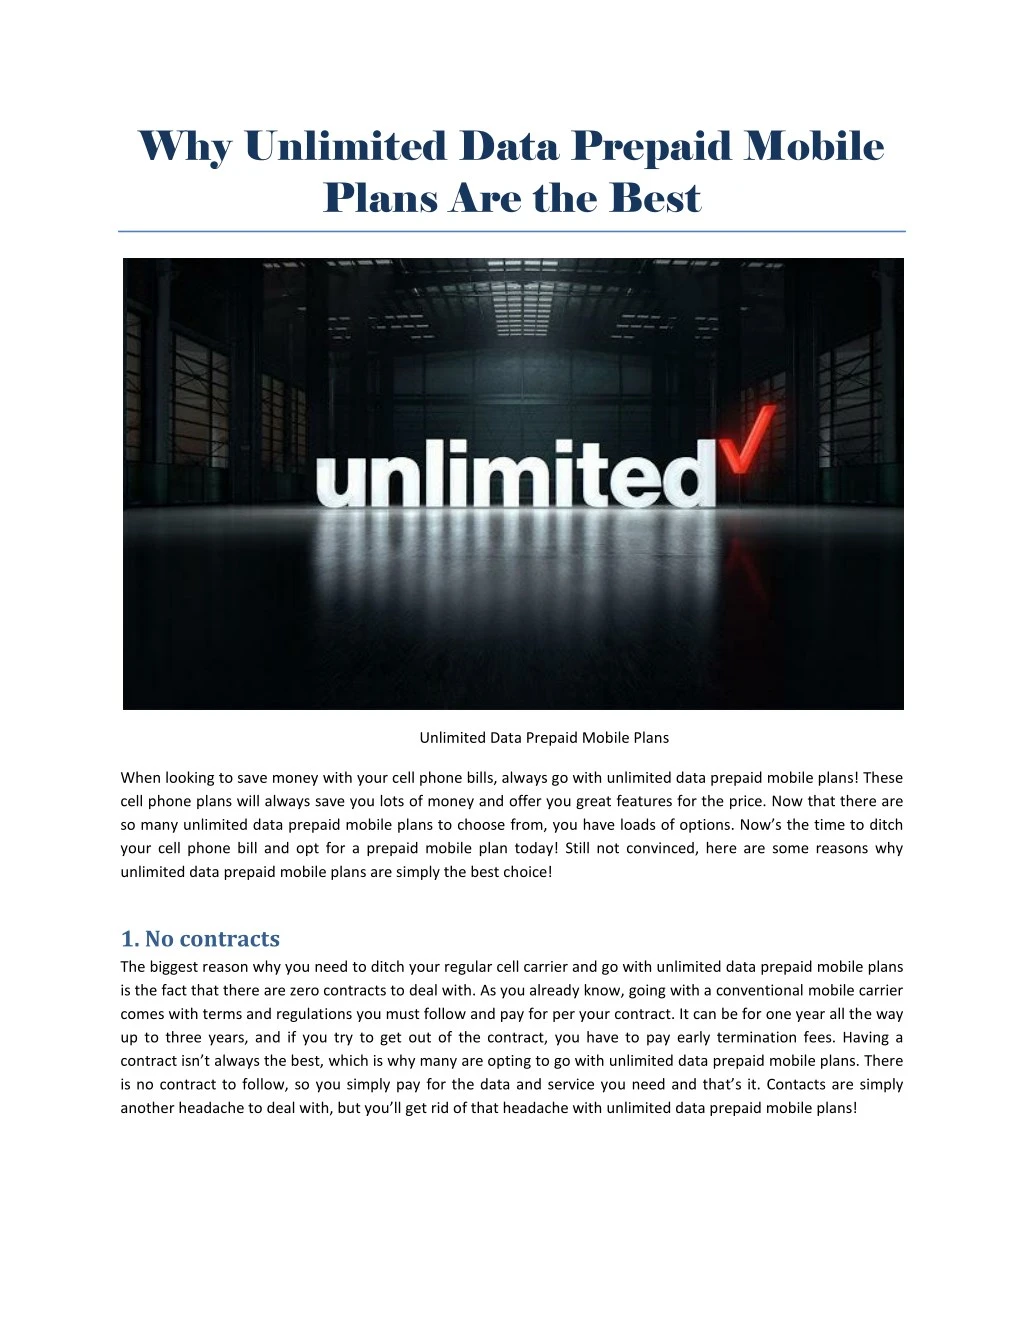 why unlimited data prepaid mobile plans